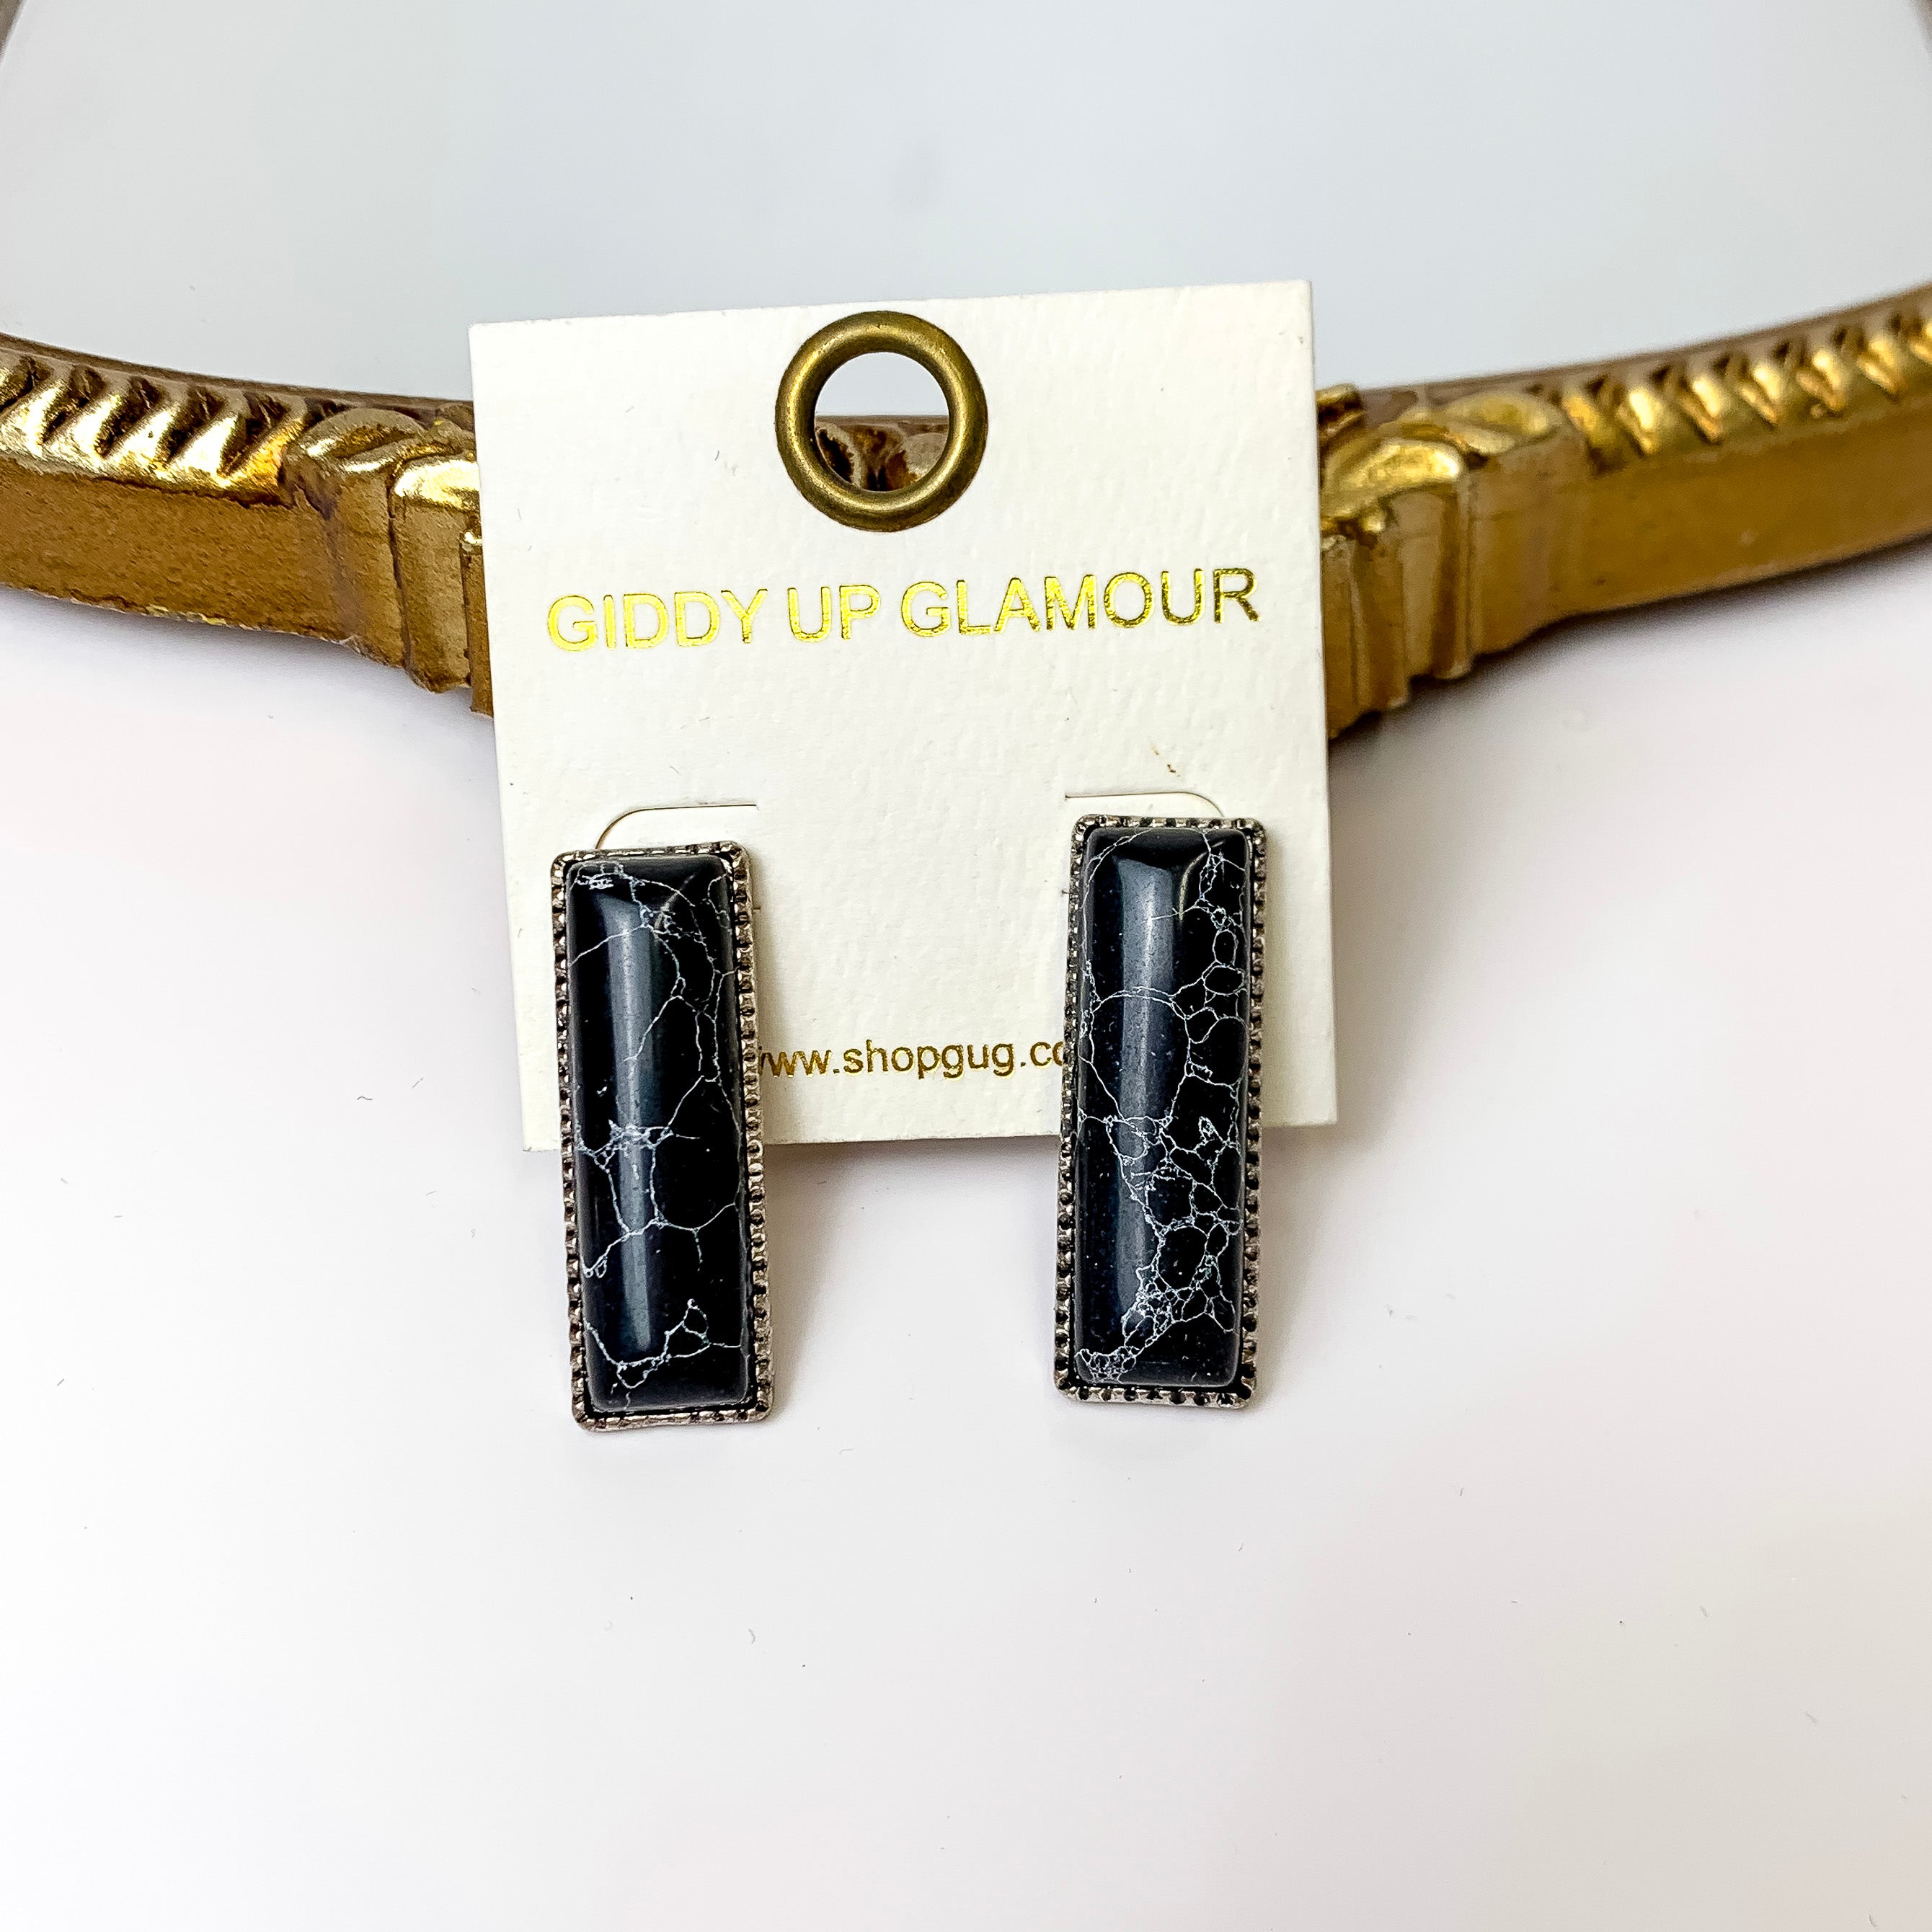 Medium Silver Tone Rectangle Faux Stone Earrings in Black - Giddy Up Glamour Boutique